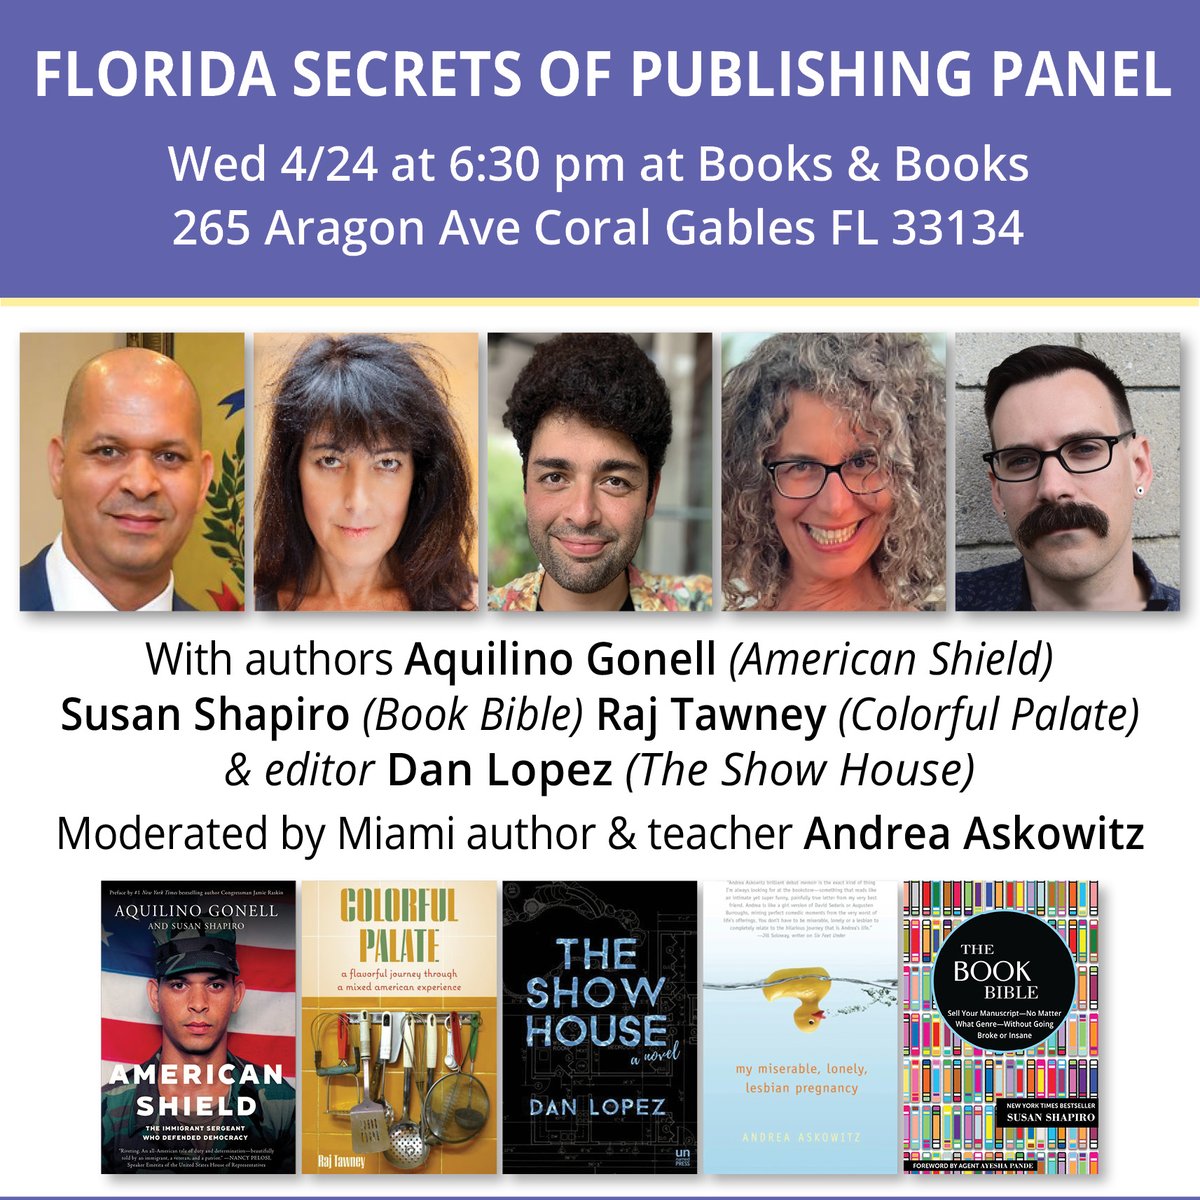 If you're near #Coralgables @florida Wed 4/24 at 6:30 come to my exciting free @BooksandBooks #writing #publishing panel with American Shield author @SergeantAqGo @CounterpointLLC editor @dan_lopez82 #miami authors @andreaaskowitz #rajtawney Thanks for helping spread the word!